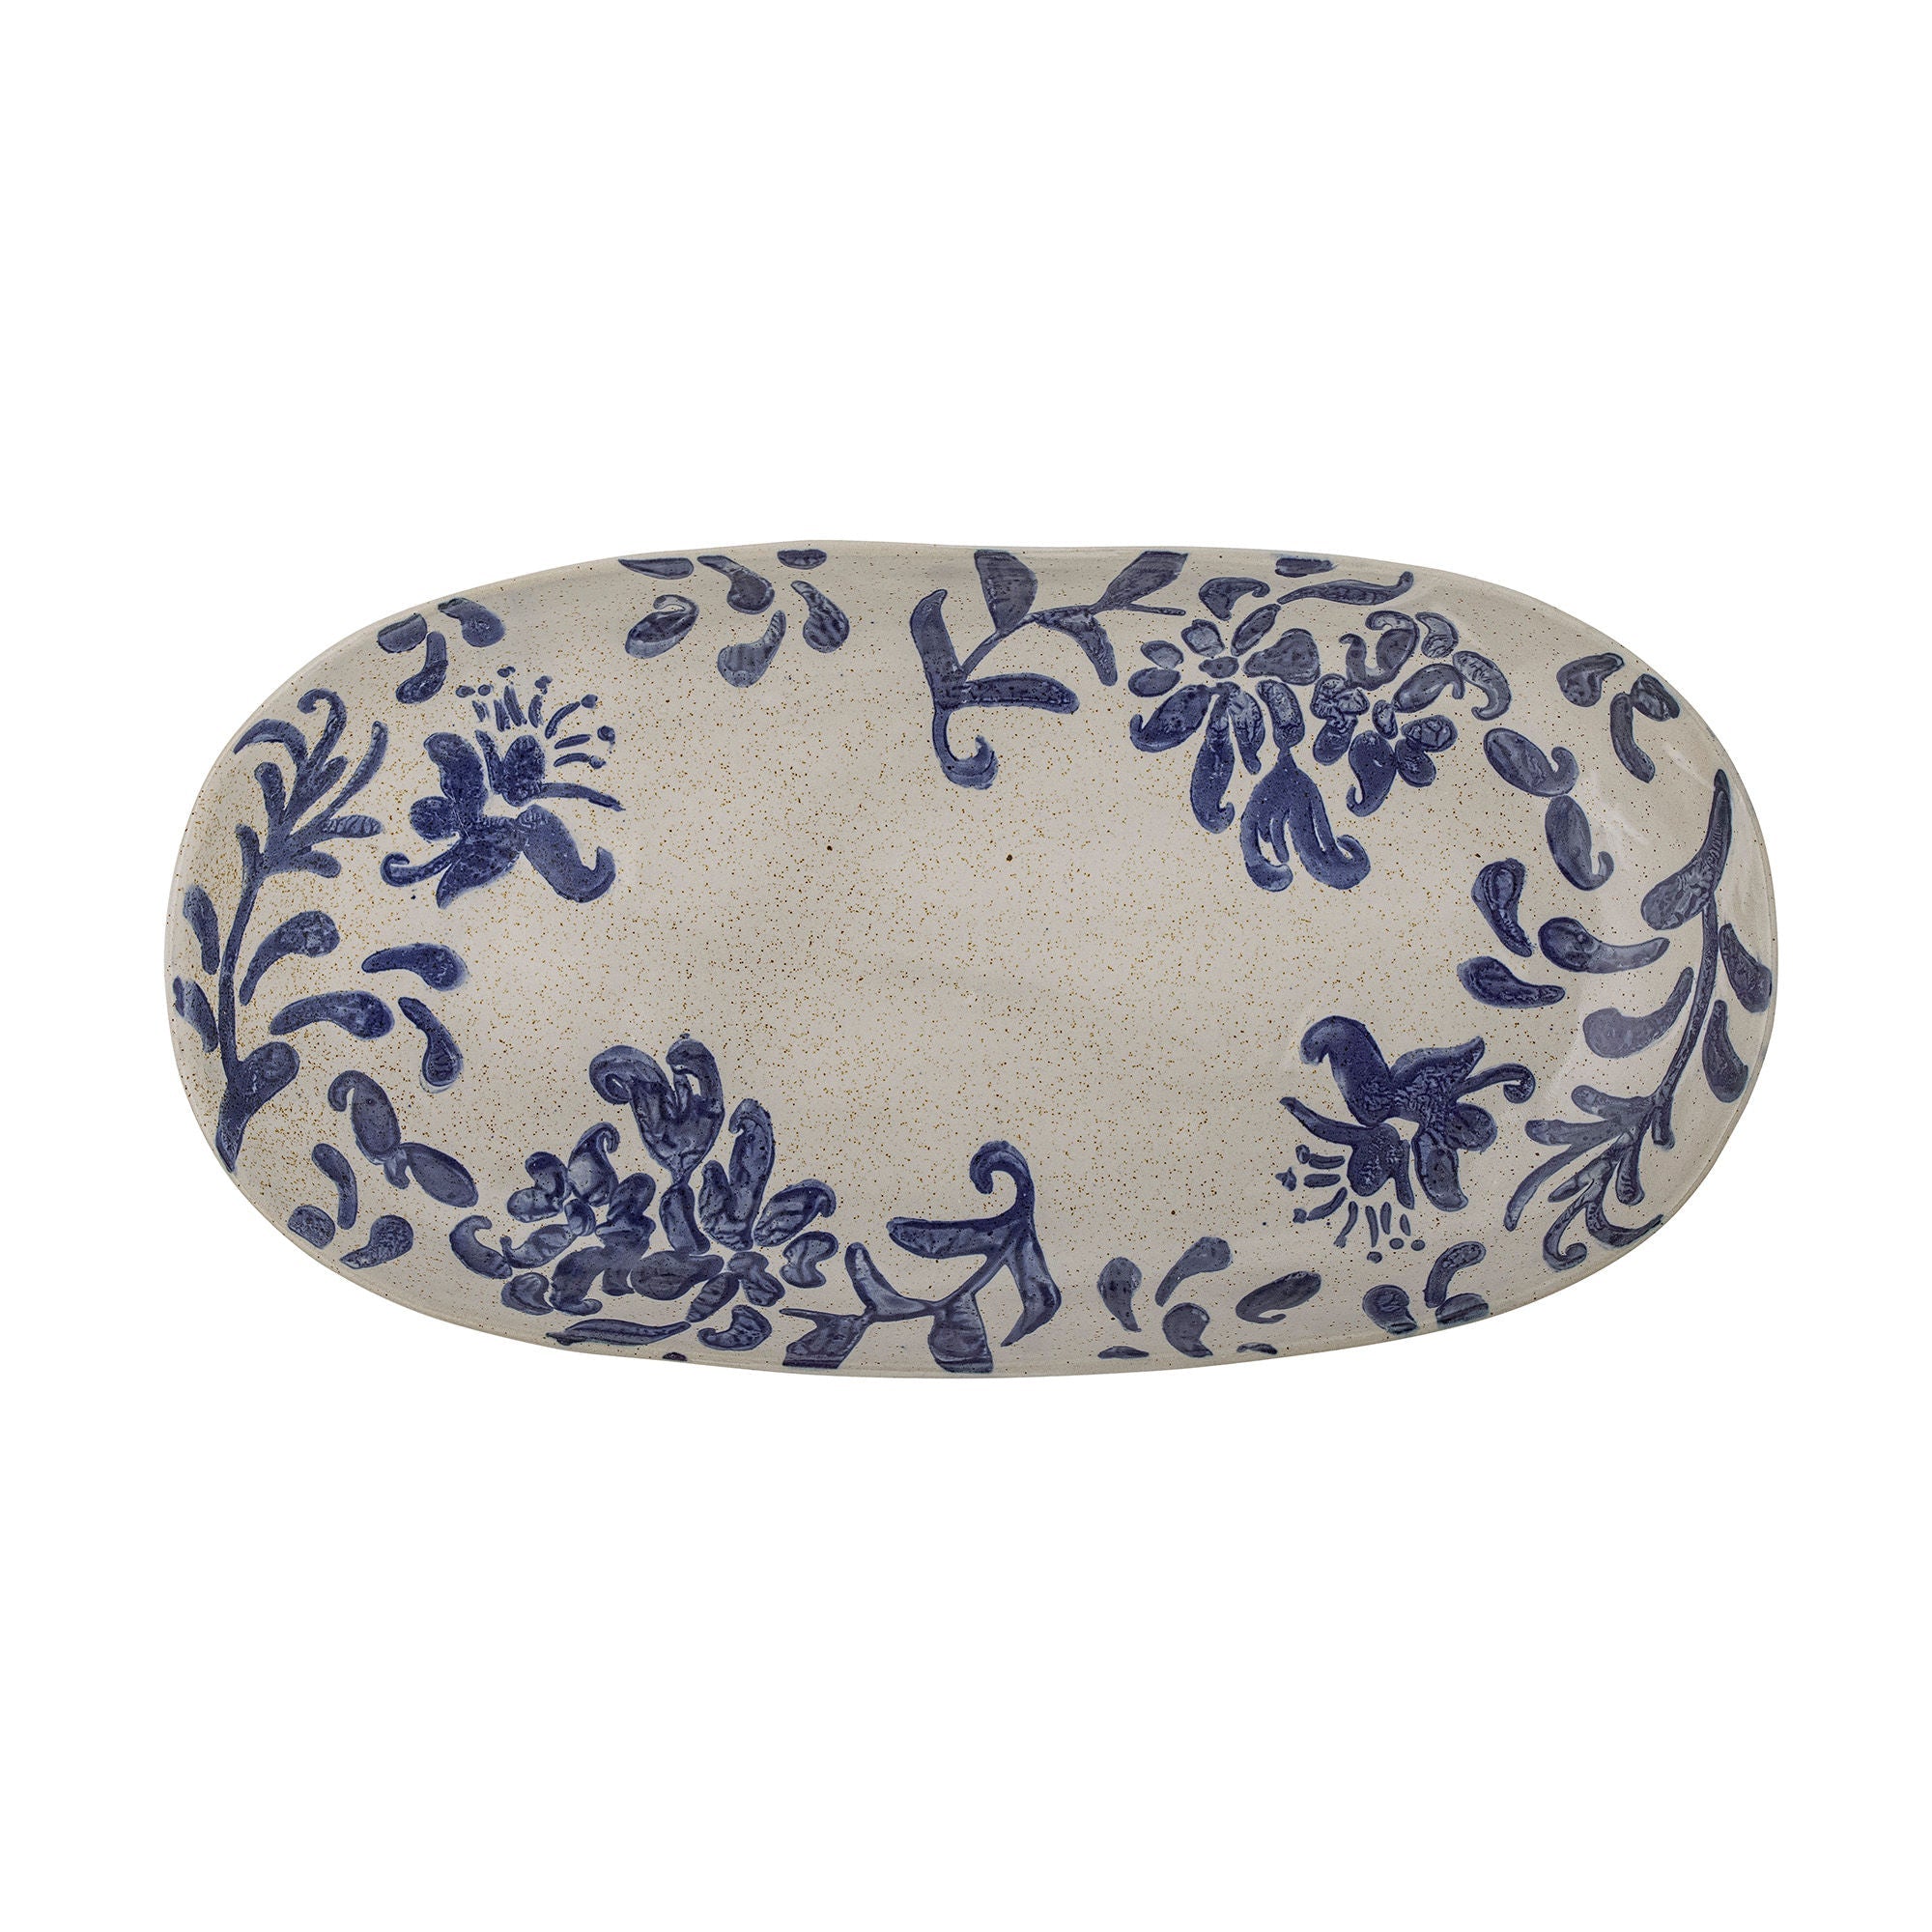 Creative Collection Petunia Serving Plate, Blue, Stoneware